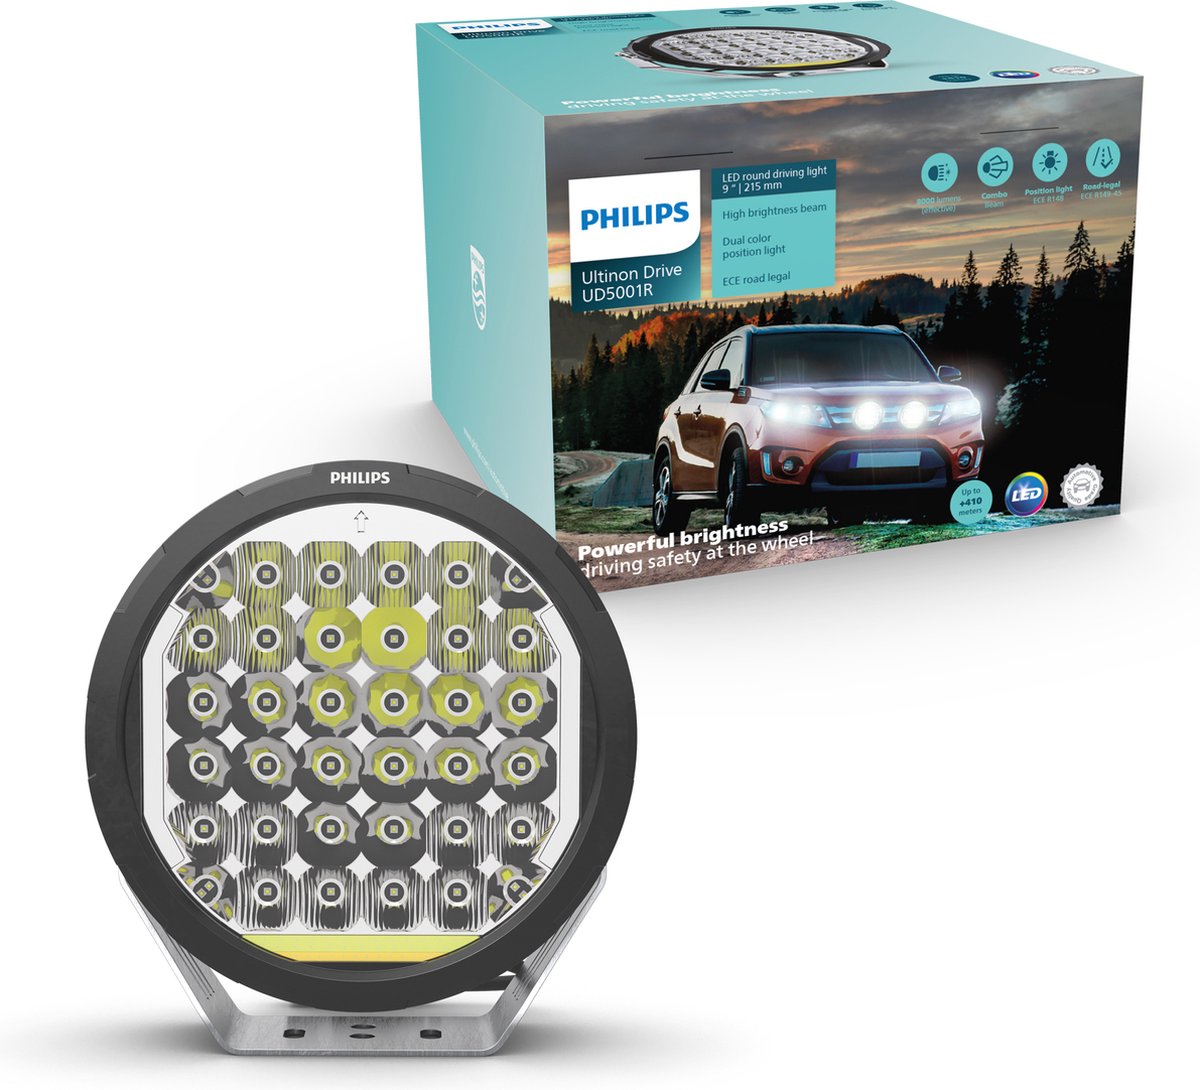 Philips Ultinon Drive 5001R 9 Inch LED rijverlichting Rond